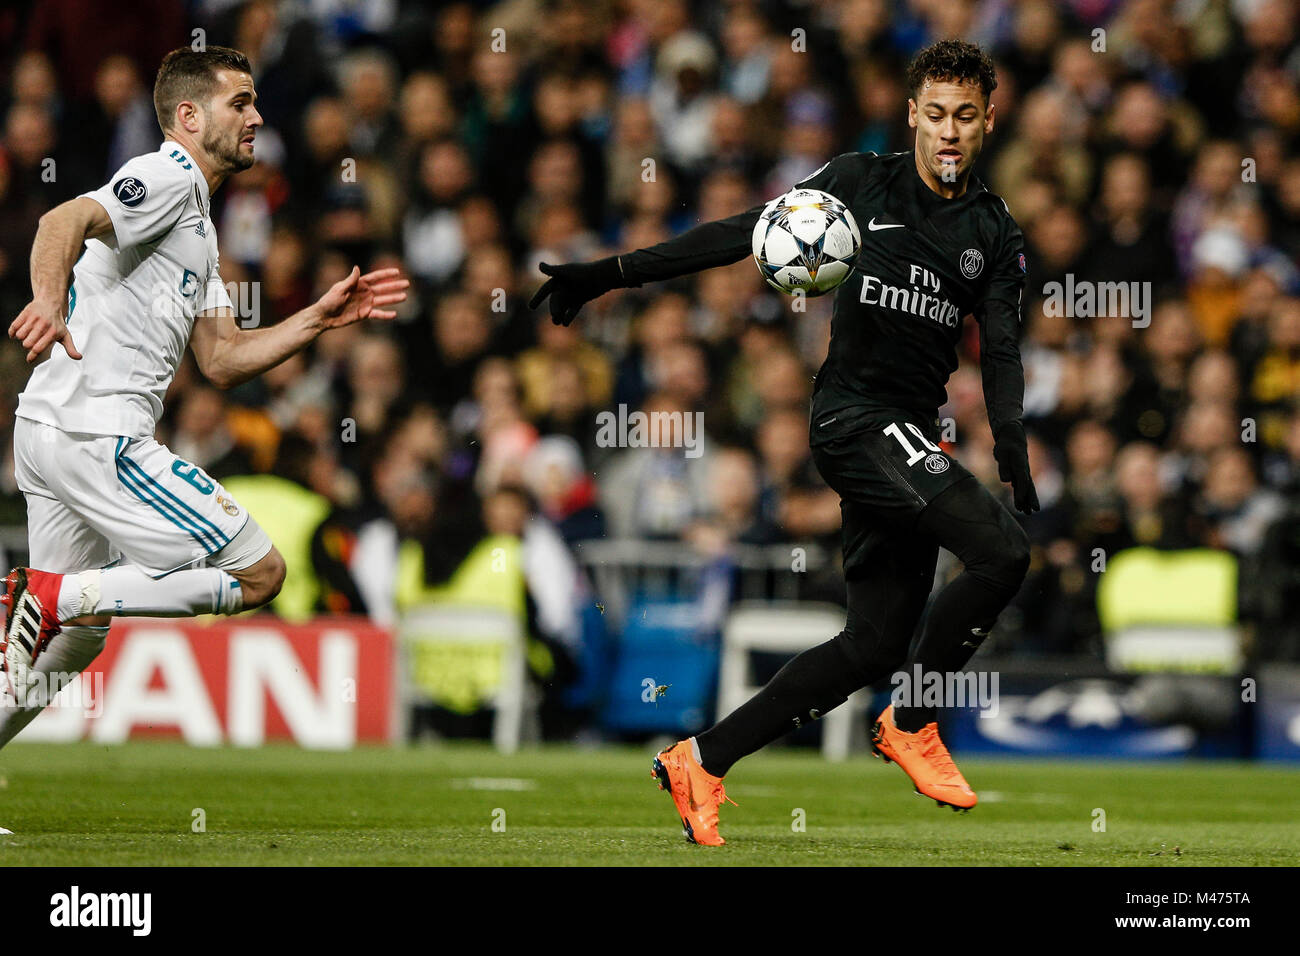 Neymar Psg High Resolution Stock Photography And Images Alamy